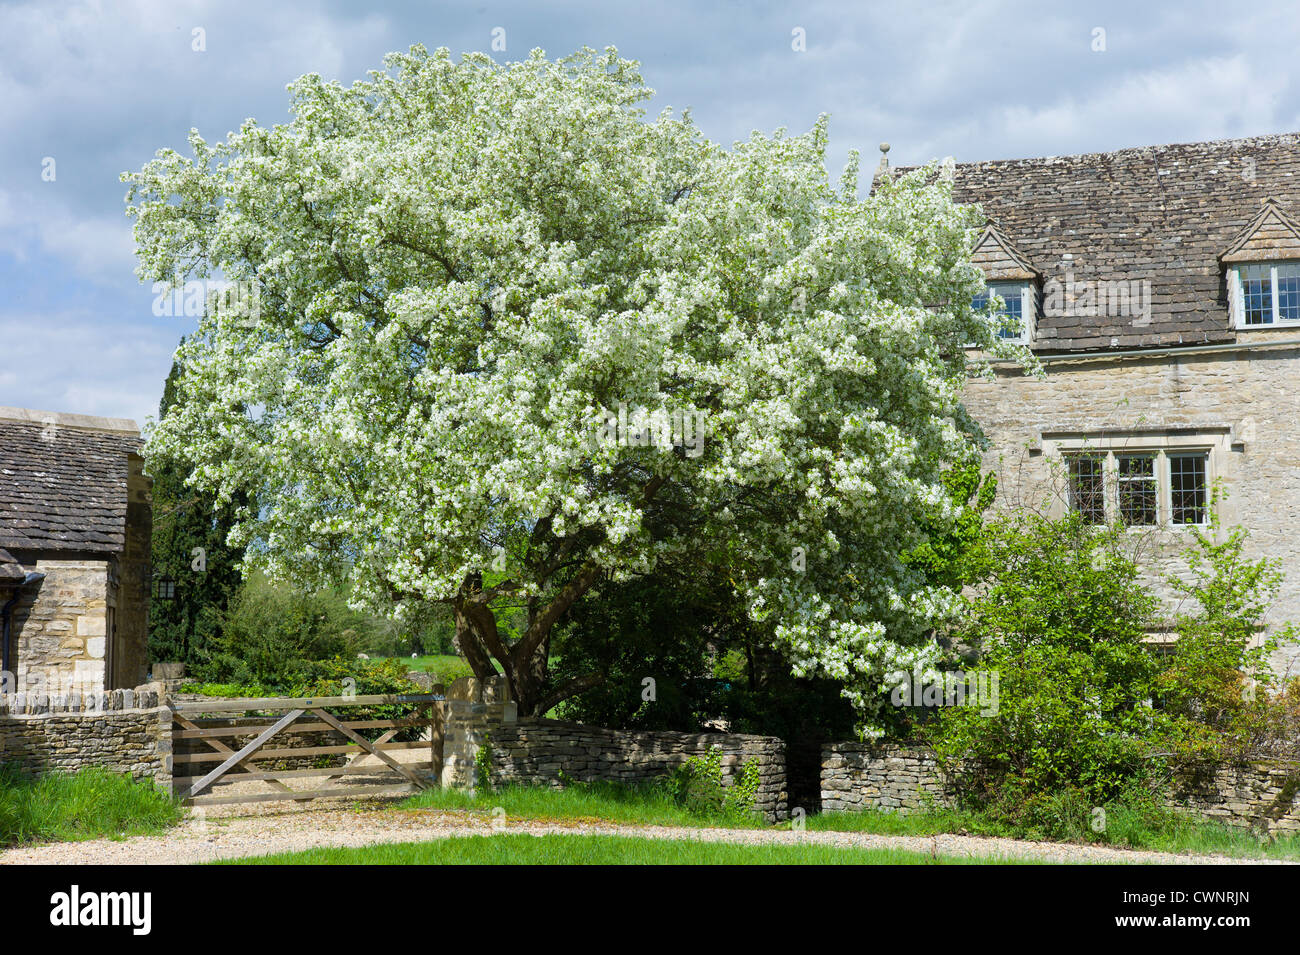 Pear tree in blossom and traditional Cotswold stone cottage in quaint village of Southrop in the Cotswolds, Gloucestershire, UK Stock Photo